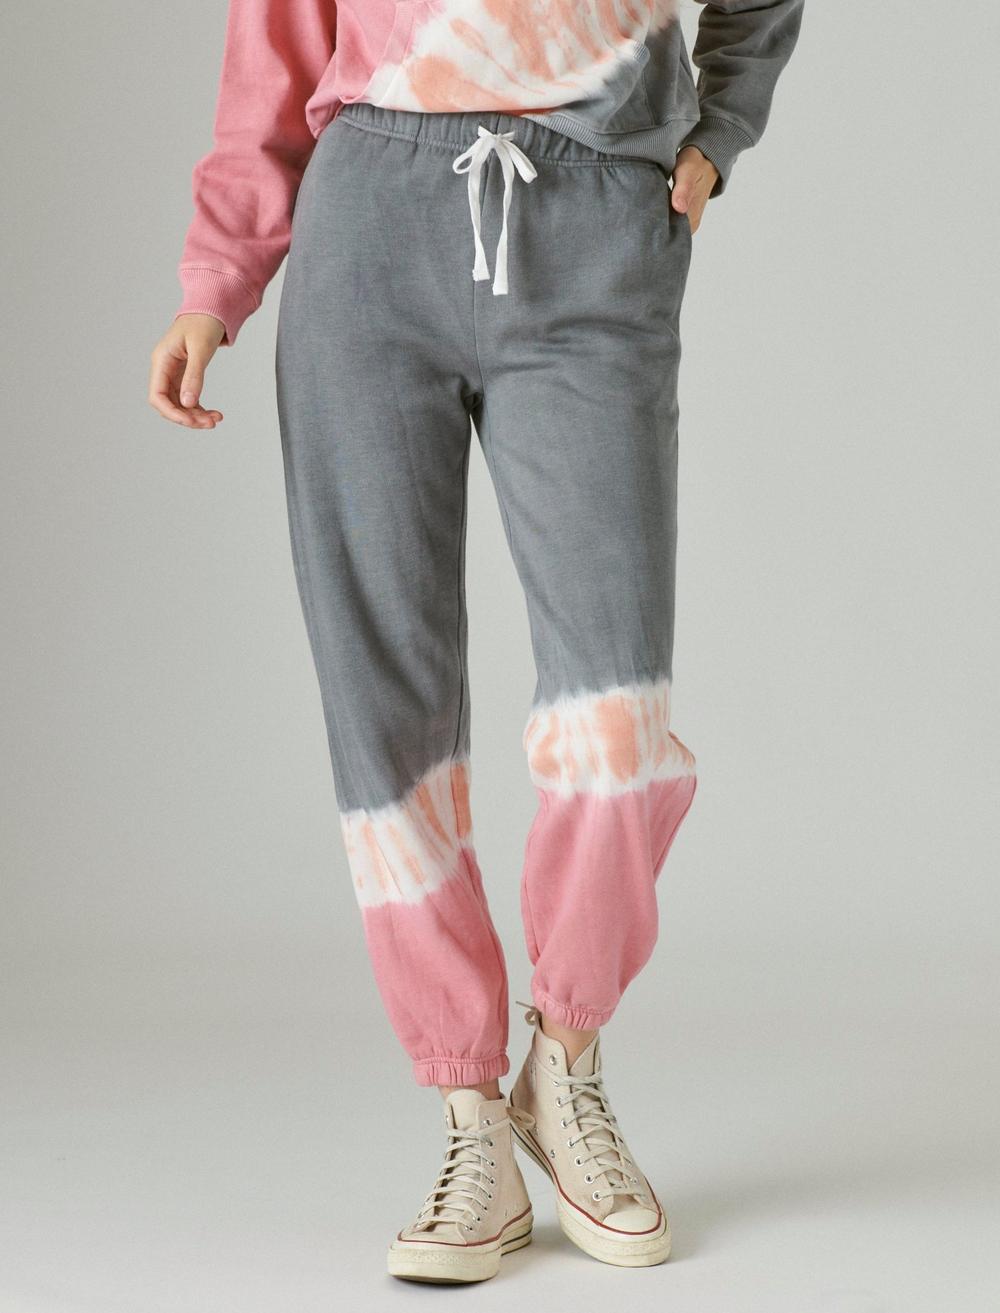 CHILL AT HOME FLEECE JOGGER, image 4